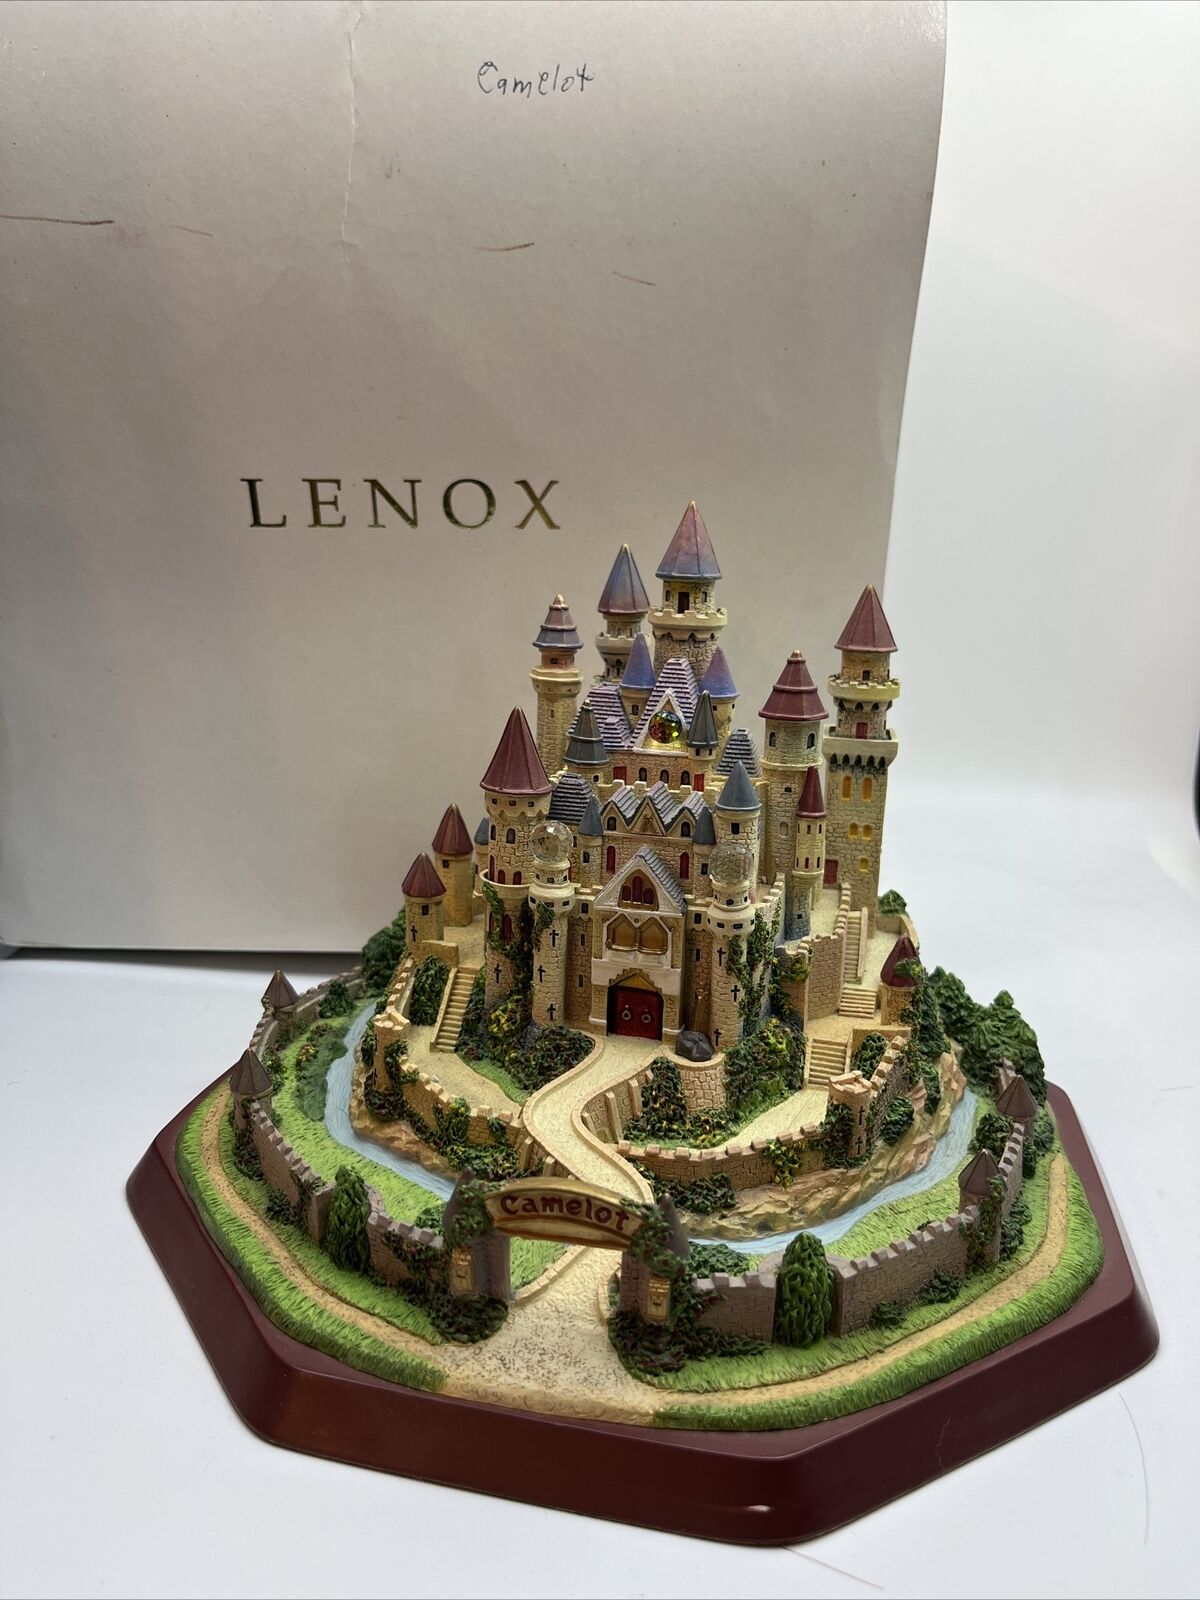 Lenox (1995) Camelot Castle, Great Castles of the World Collection, Hexagon Base